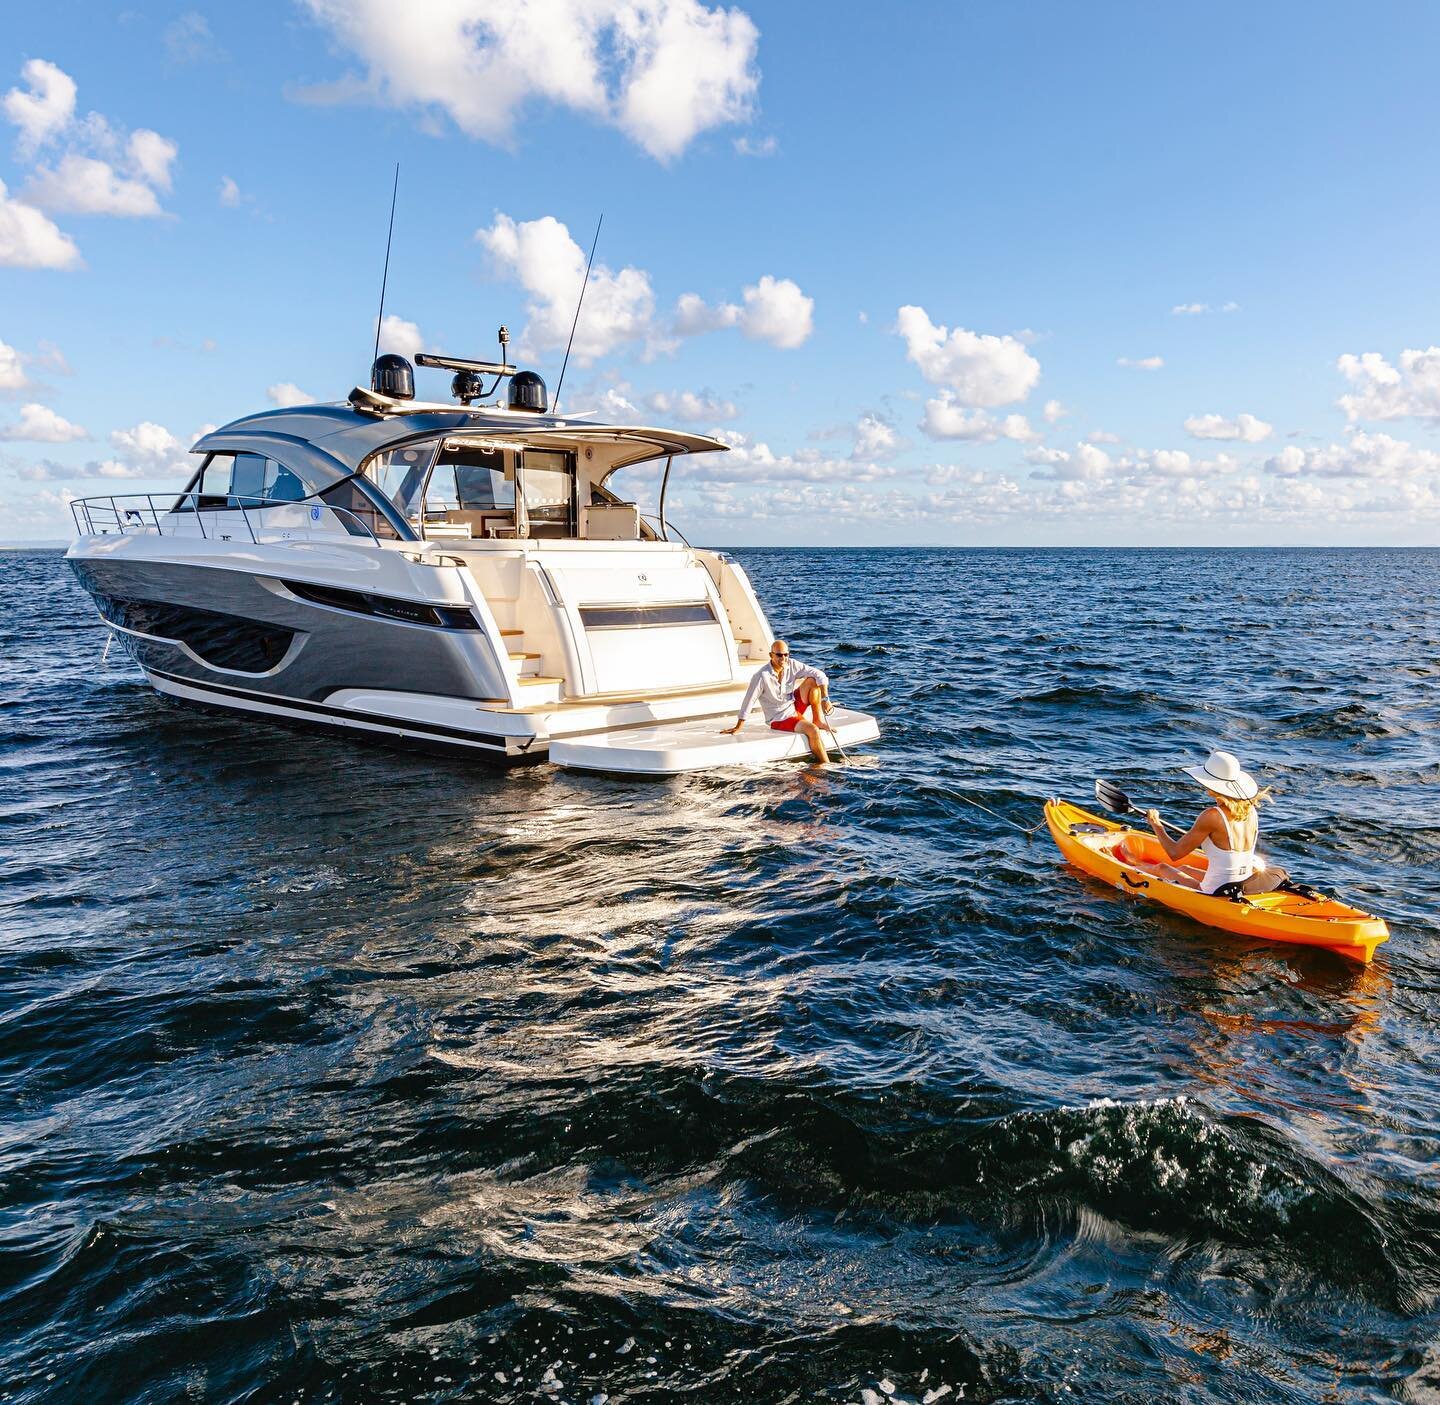 Your adventure awaits! Discover more at boatingpartnerships.com.au
Nothing like waking up on the water ready for another exciting day on your luxury Riviera yacht! 
#riviera #boatingpartnerships #luxuryyachts #boatlife #rivierafamily